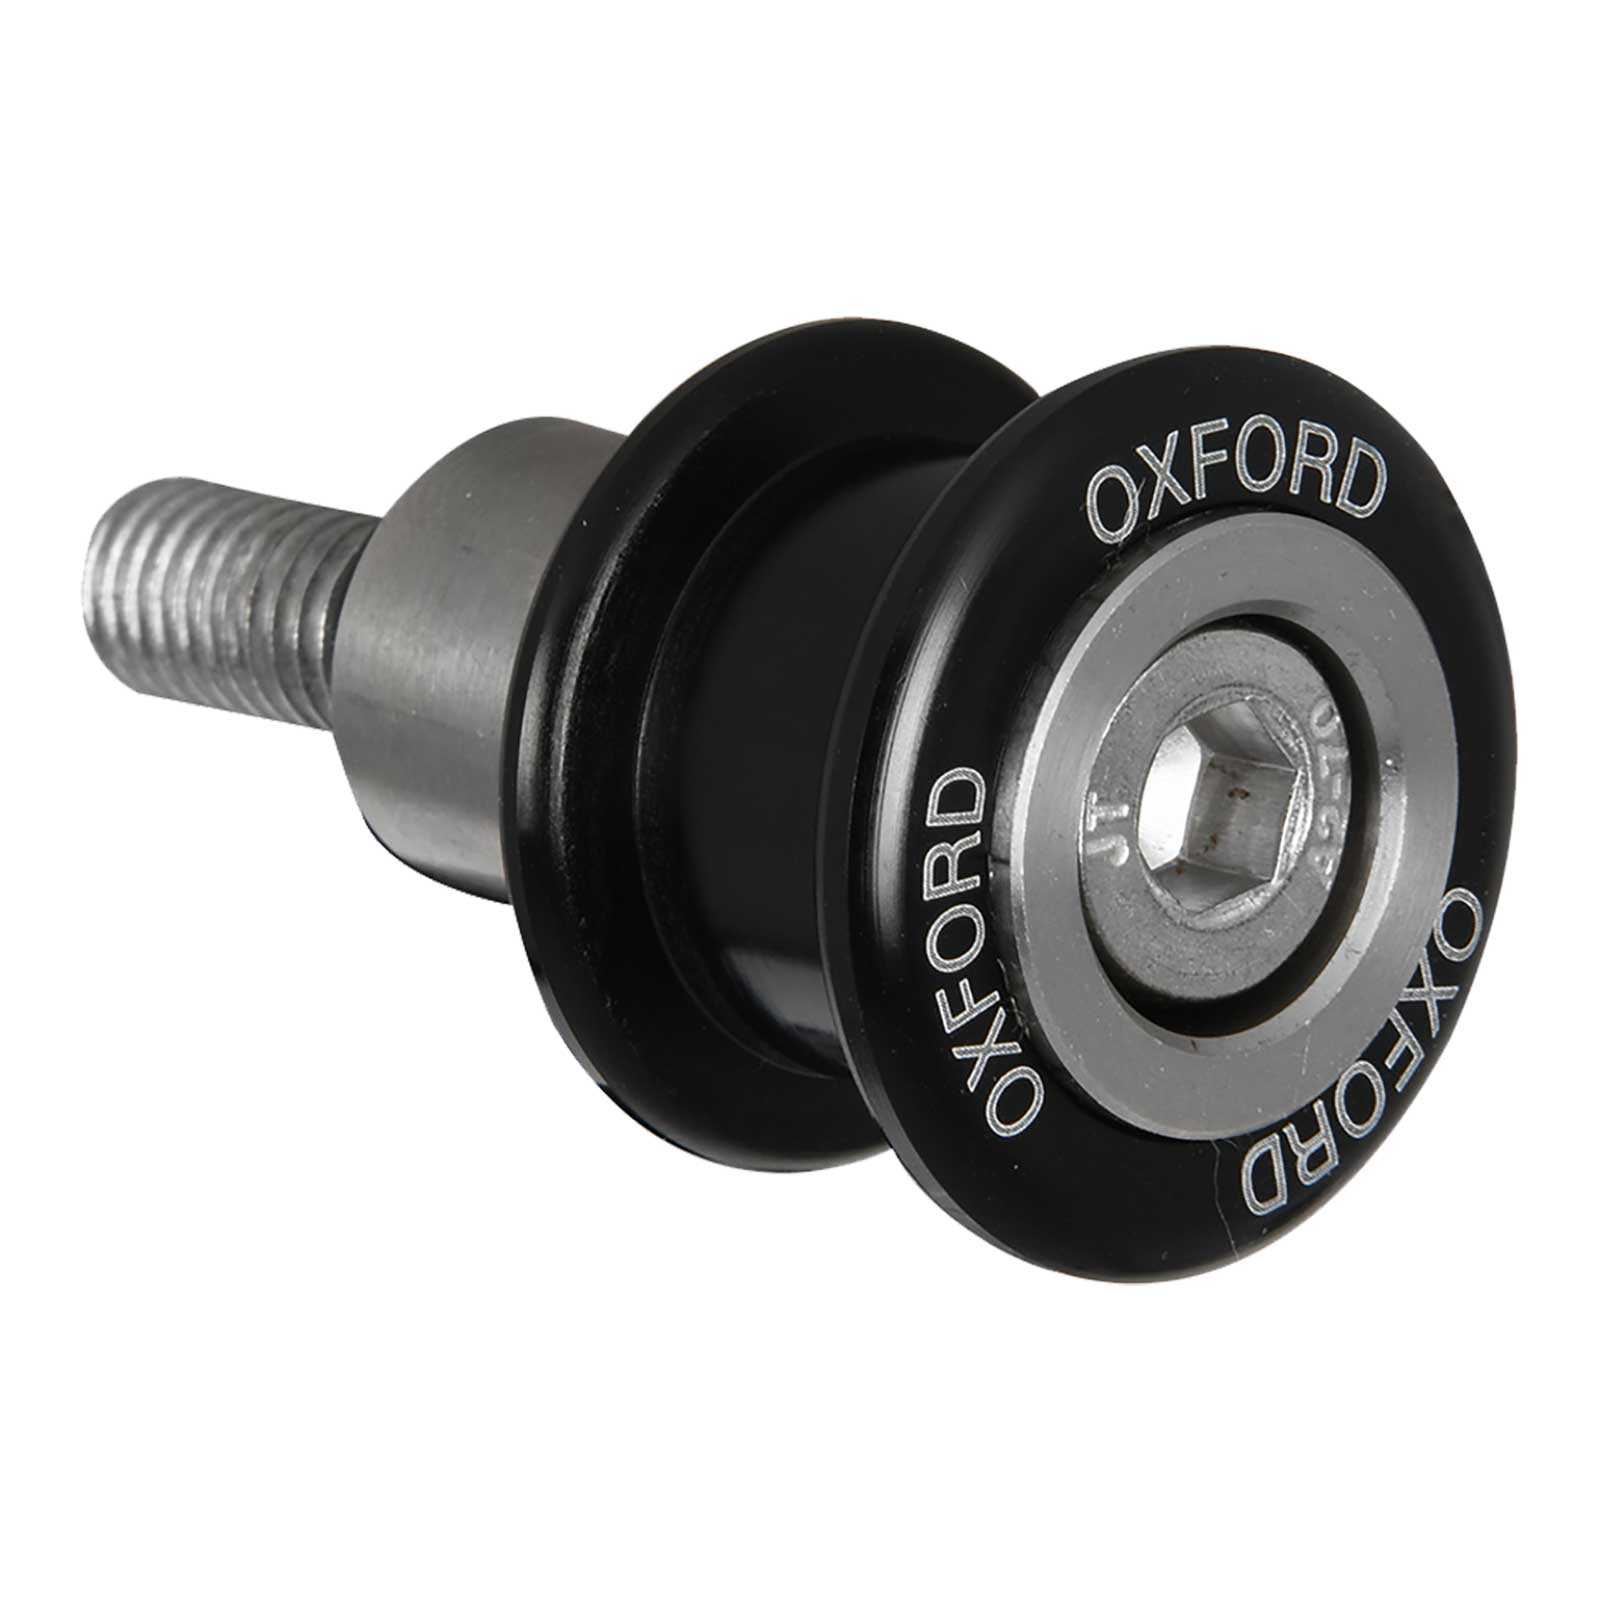 Oxford, Oxford Spinners Stand Bobbins M8 (1.25) with Spacer - Black